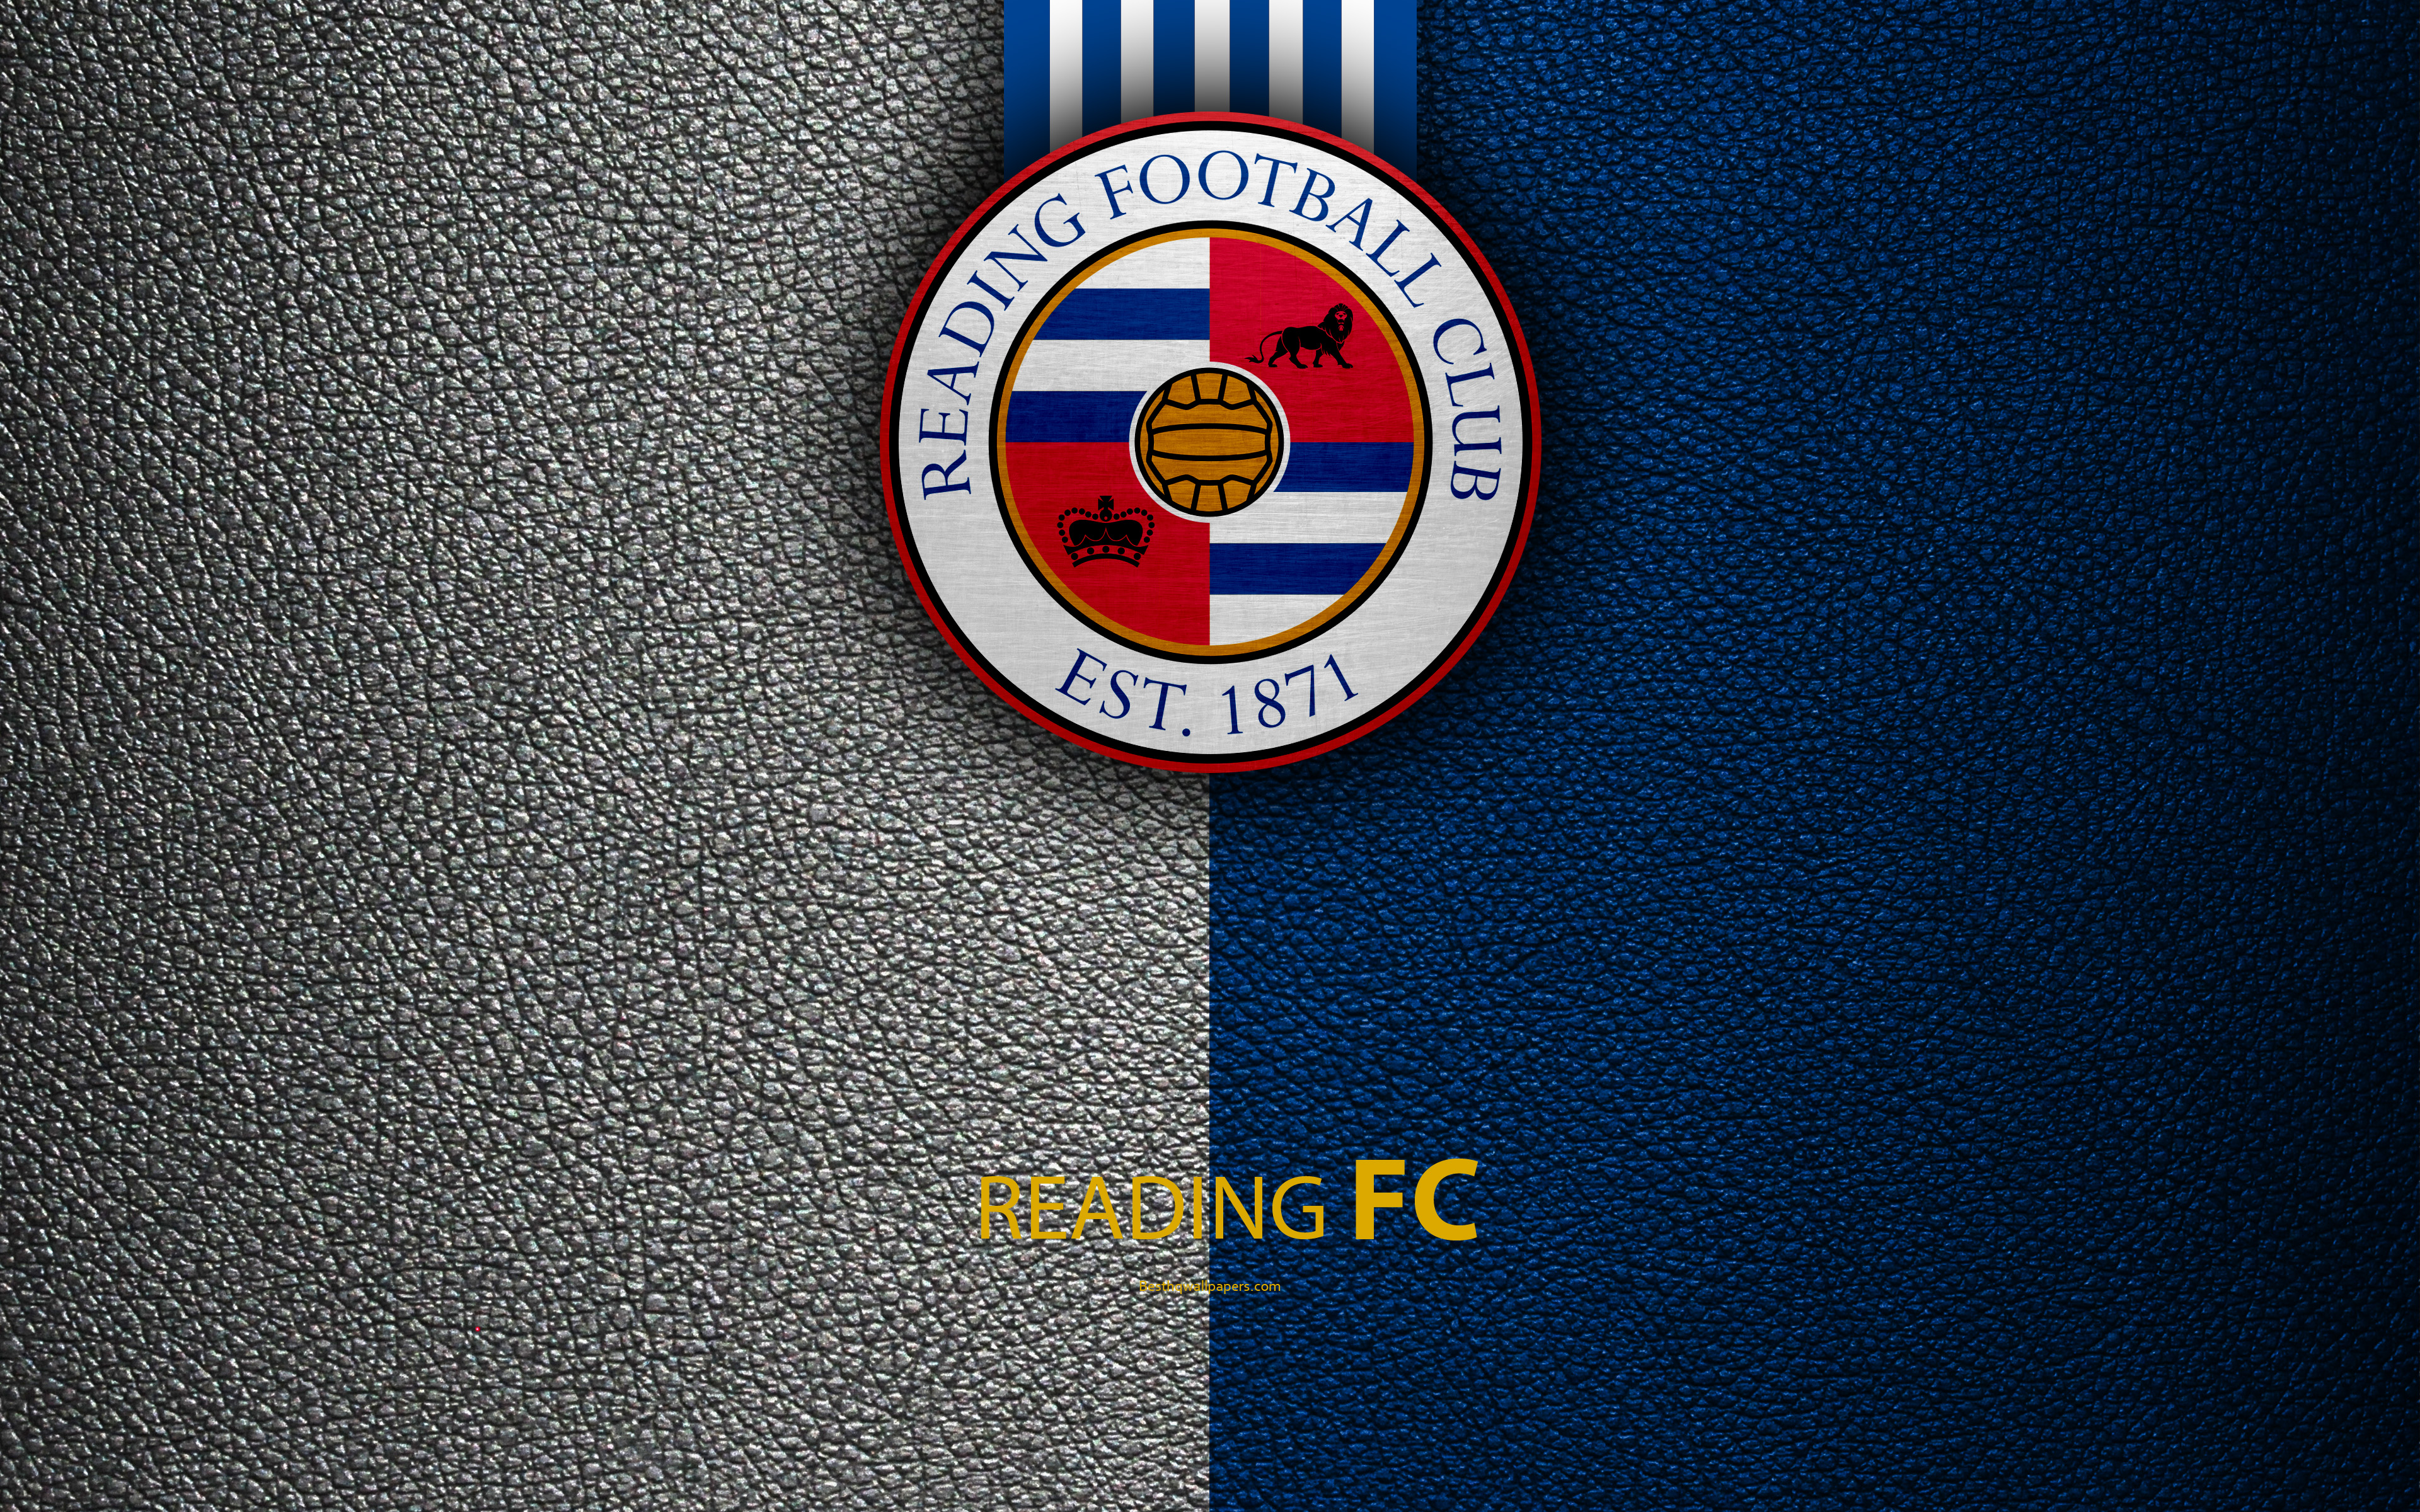 Download wallpaper Reading FC, 4K, English football club, Reading logo, Football League Championship, leather texture, Hammersmith, Fulham, London UK, EFL, football, Second English Division for desktop with resolution 3840x2400. High Quality HD